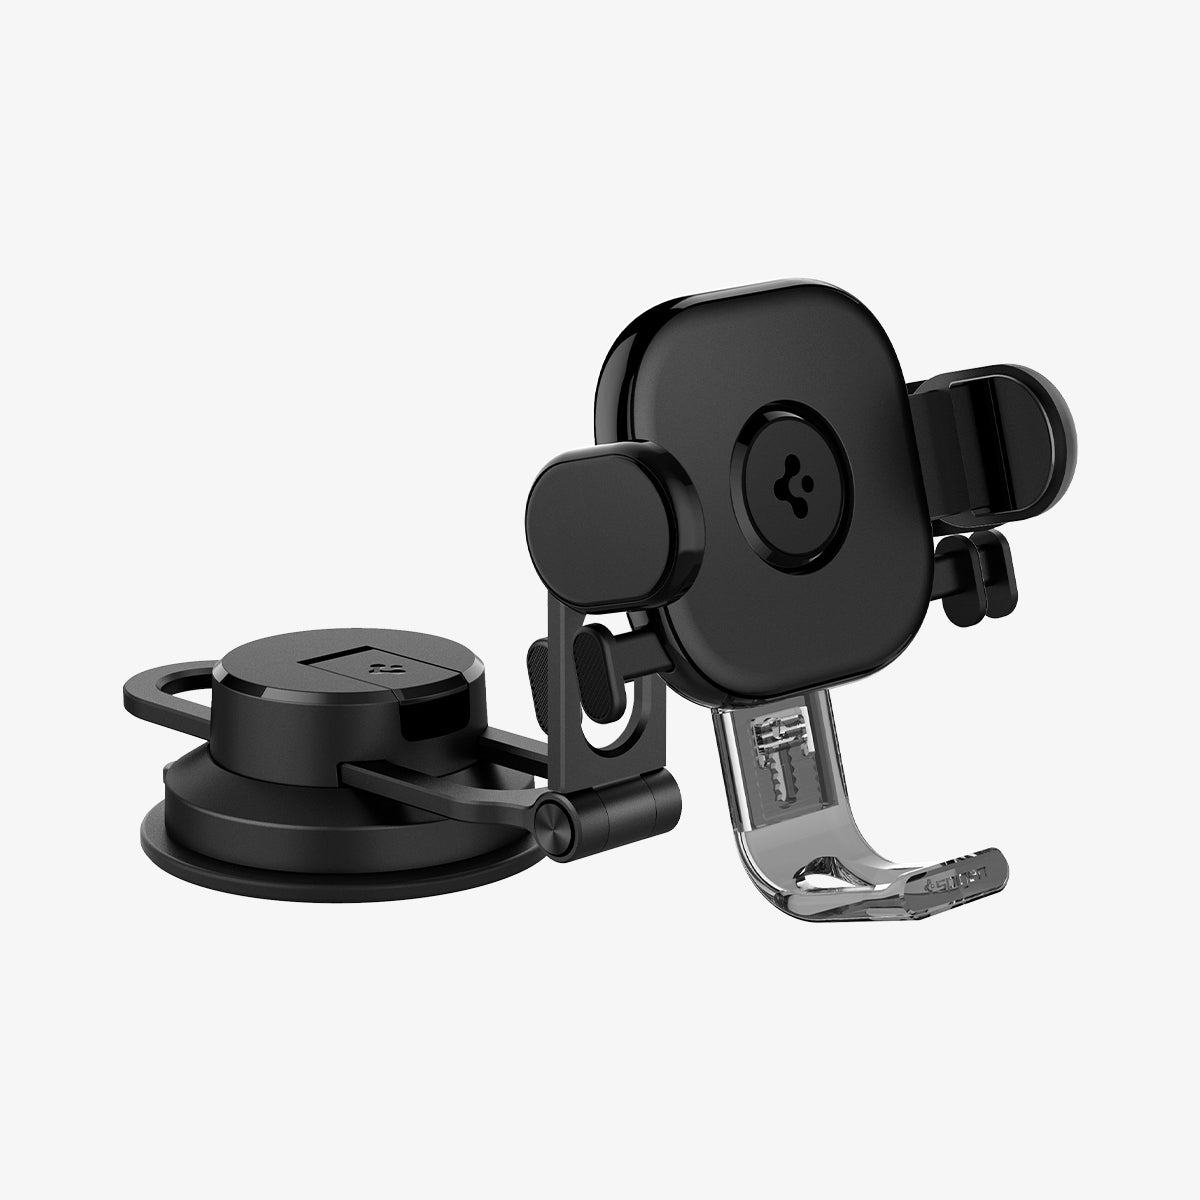 ACP05506 - UTS35 OneTap Universal Car Mount Dashboard showing the front and side